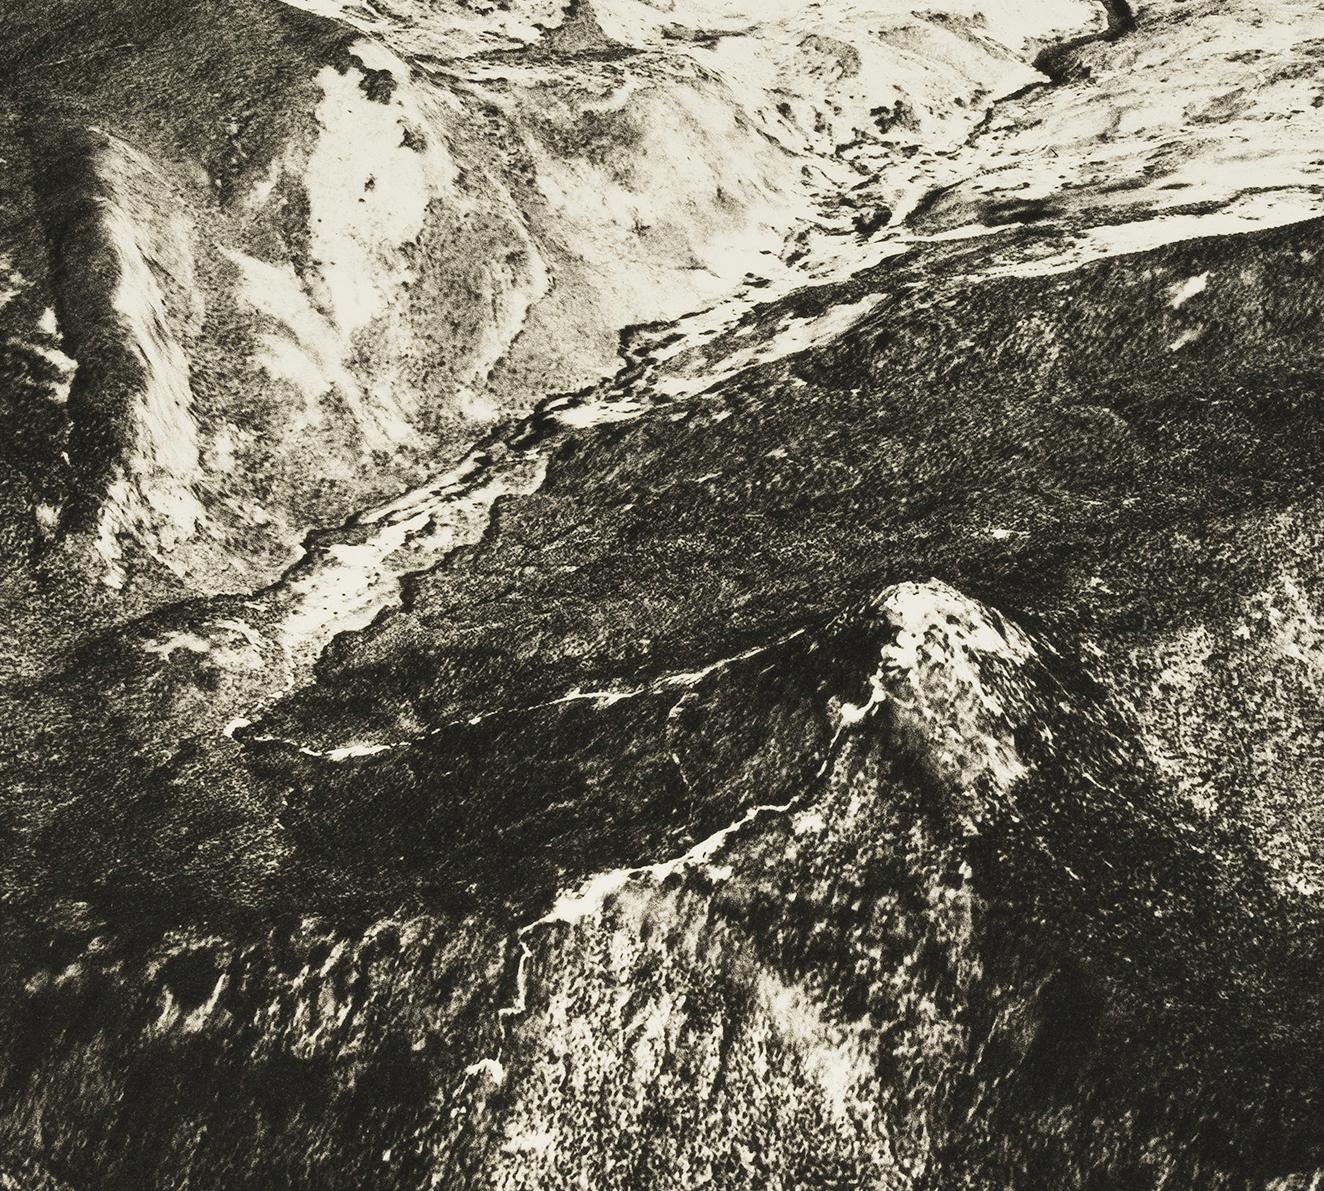 Beth Ganz, 'Adam's Peak, Sri Lanka', copperplate photogravure etching, edition 10, 2020. Signed, titled, and numbered 6/10 in pencil. A superb, richly-inked impression in warm black ink, on cream, wove, cotton rag paper; the full sheet in excellent